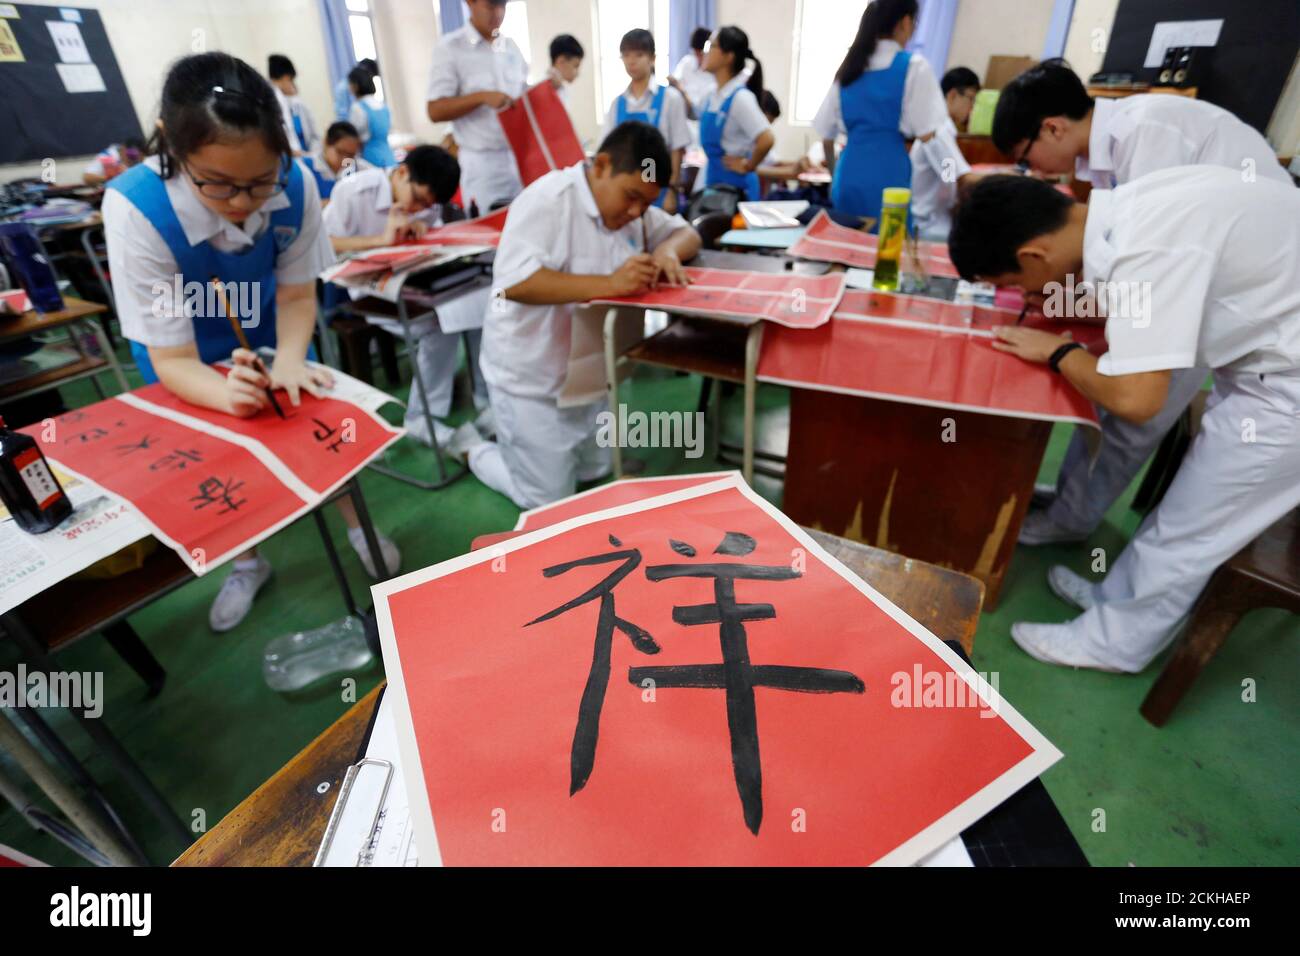 Students participate in a Chinese calligraphy event in conjunction with the  upcoming Chinese Lunar New Year of the Pig, at Tsun Jin High School in  Kuala Lumpur, Malaysia January 18, 2019. REUTERS/Lai